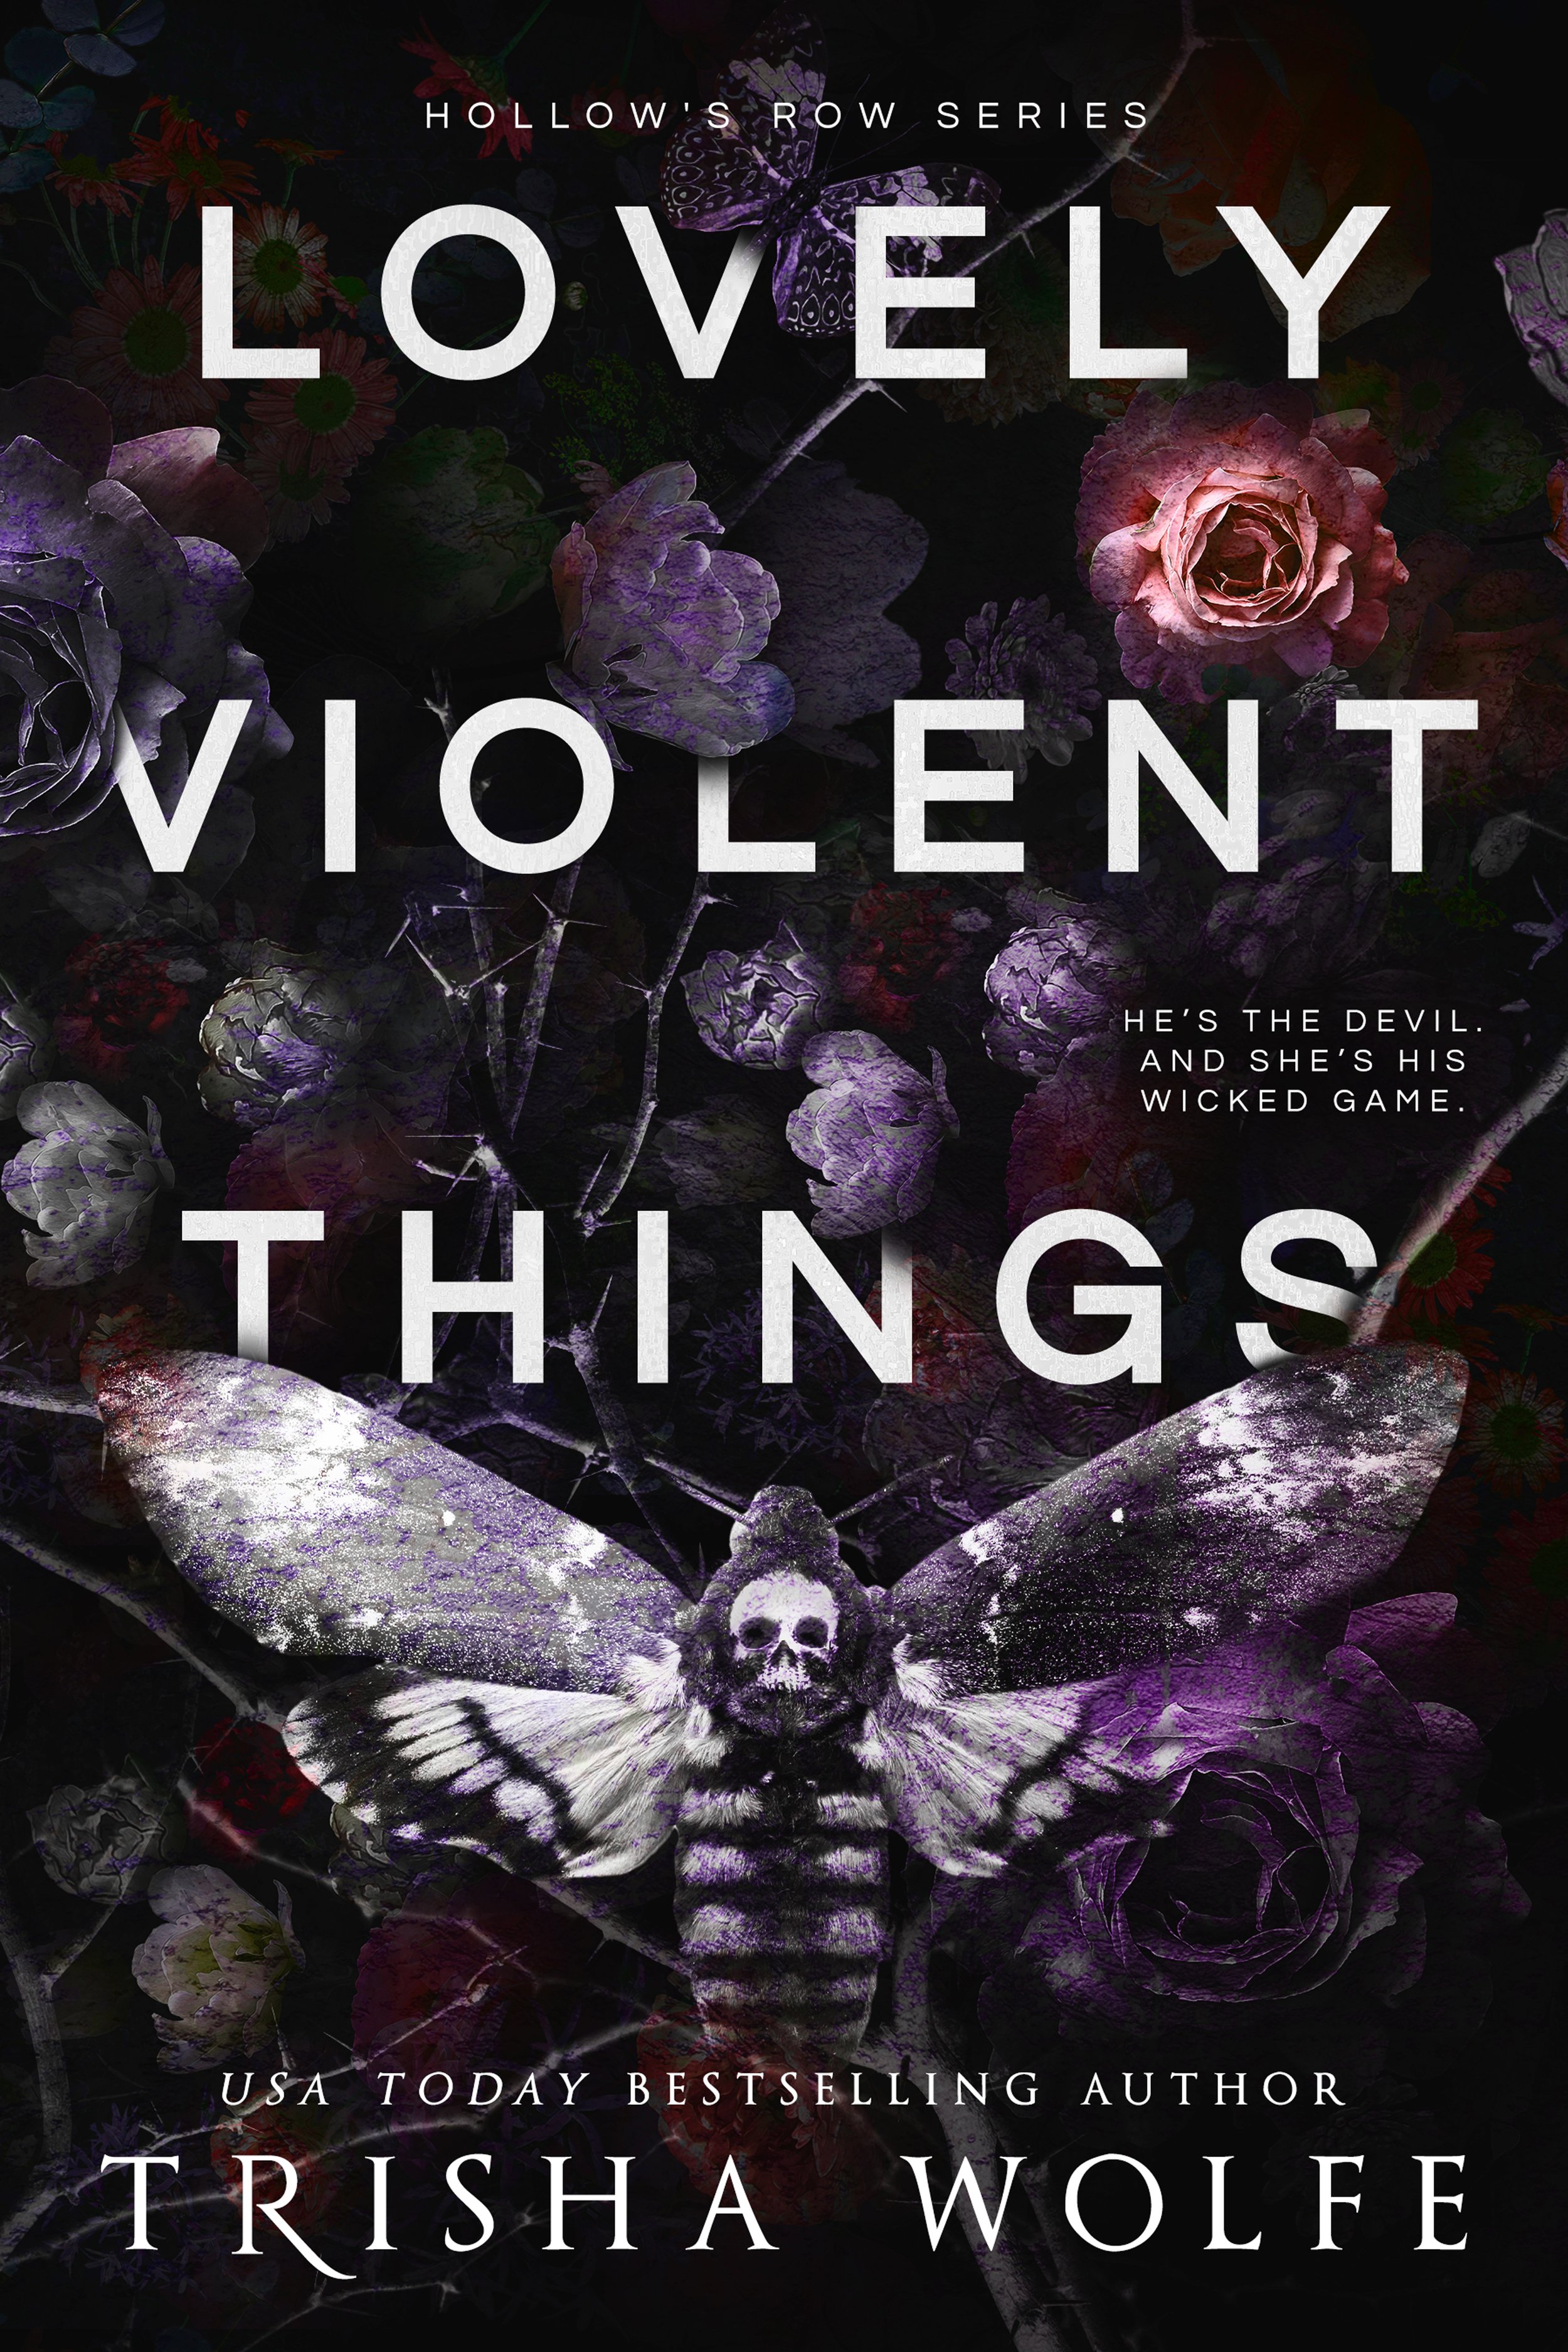 LOVELY VIOLENT THINGS